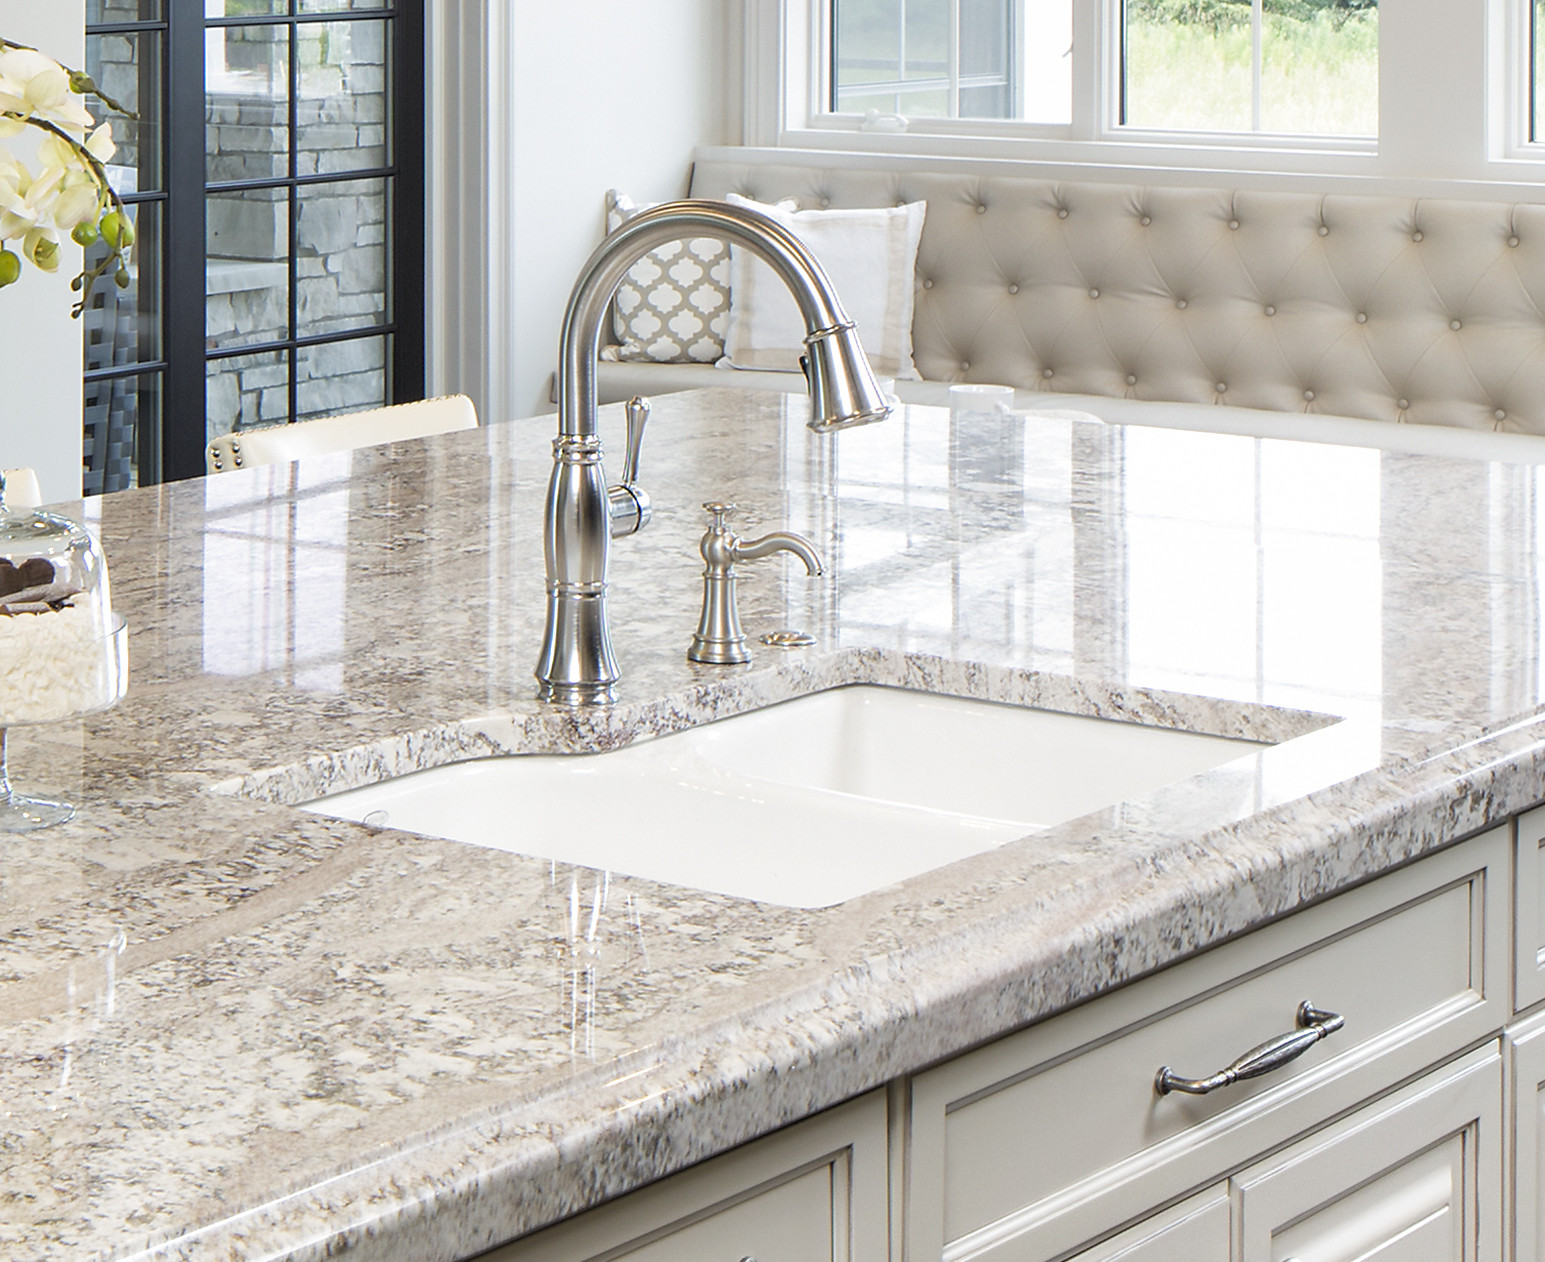 Kitchen Counter Stone
 Sink Options for Granite Countertops